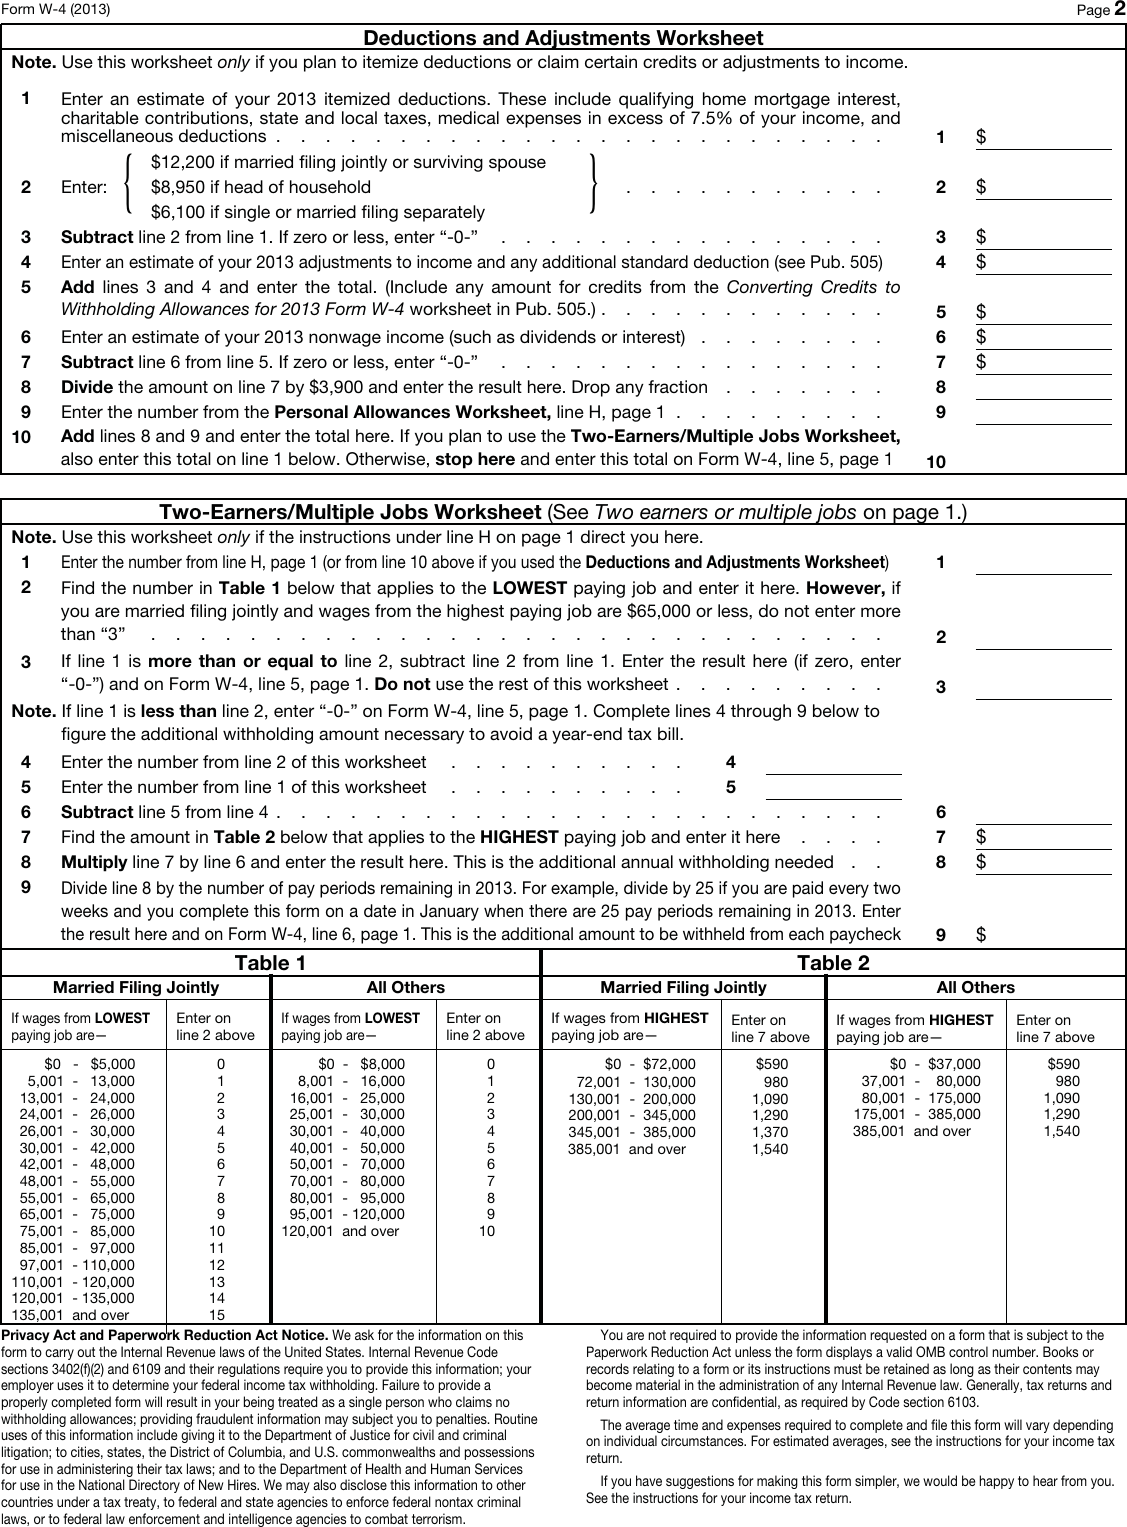 Page 3 of 8 - NonBOA_ee_packet_2007  Payroll Forms